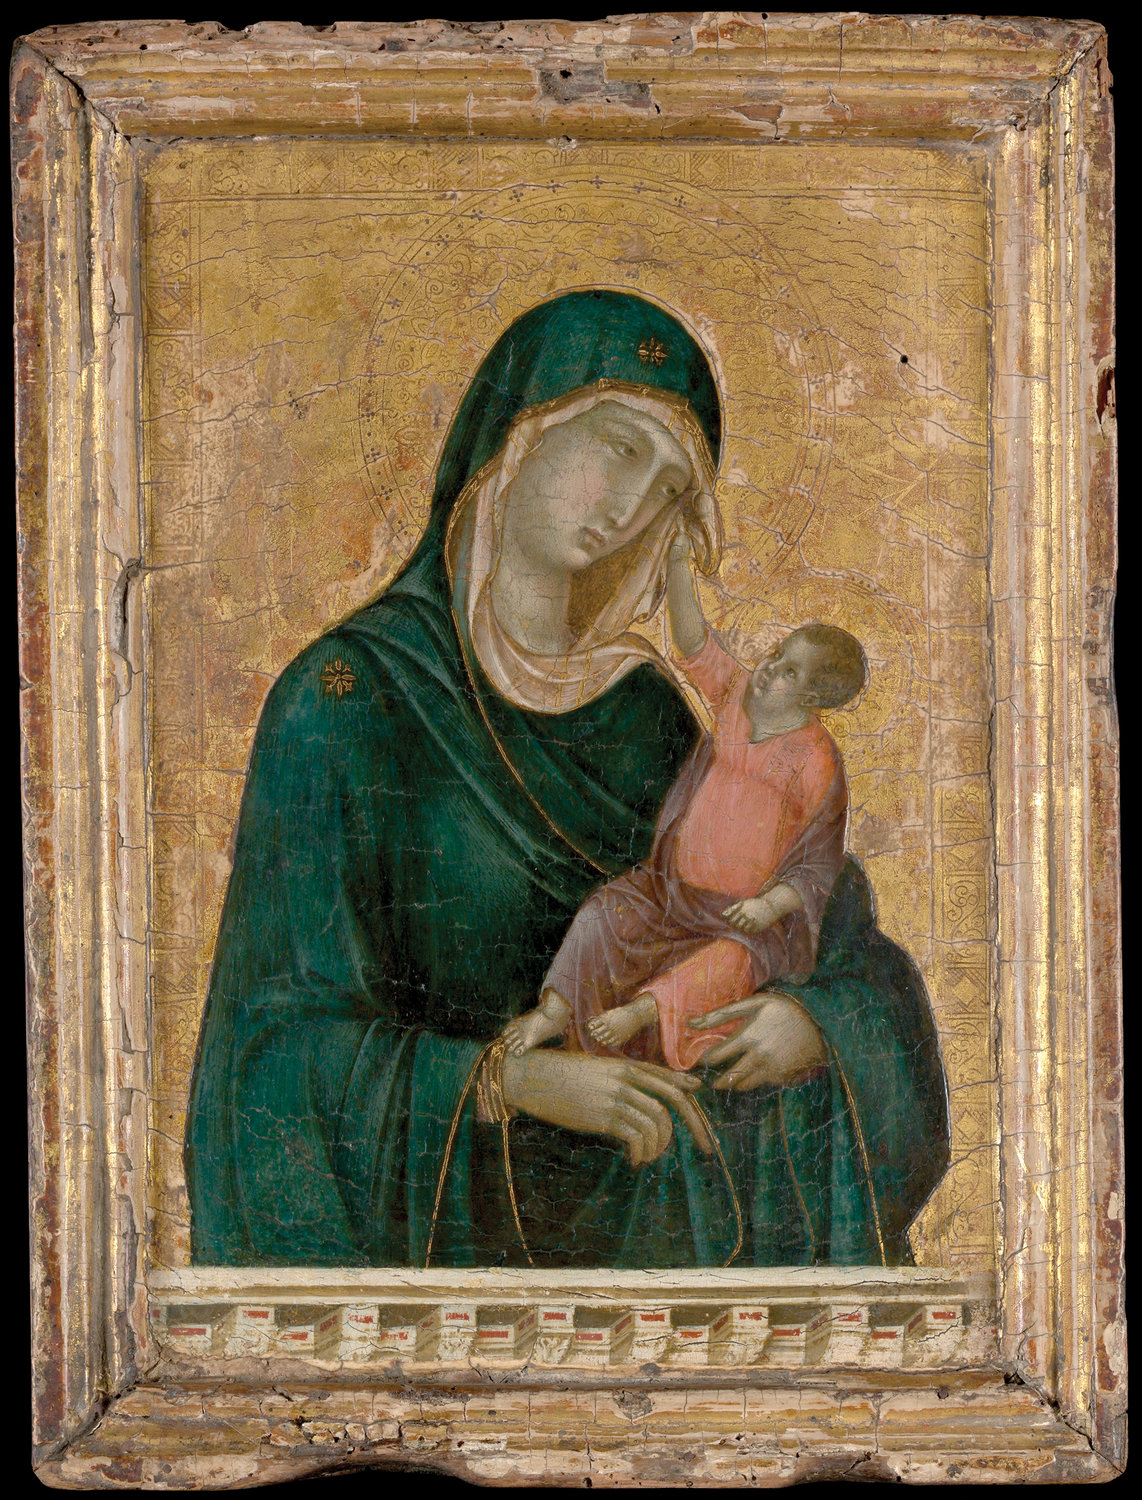 MADONNA AND CHILD—Duccio di Buoninsegna’s Madonna and Child, ca. 1290-1300, is on display at The Metropolitan Museum of Art. Tempera and gold on wood; overall, with engaged frame, 11 x 8 1/4 inches; painted surface 9 3/8 x 6 1/2 inches.